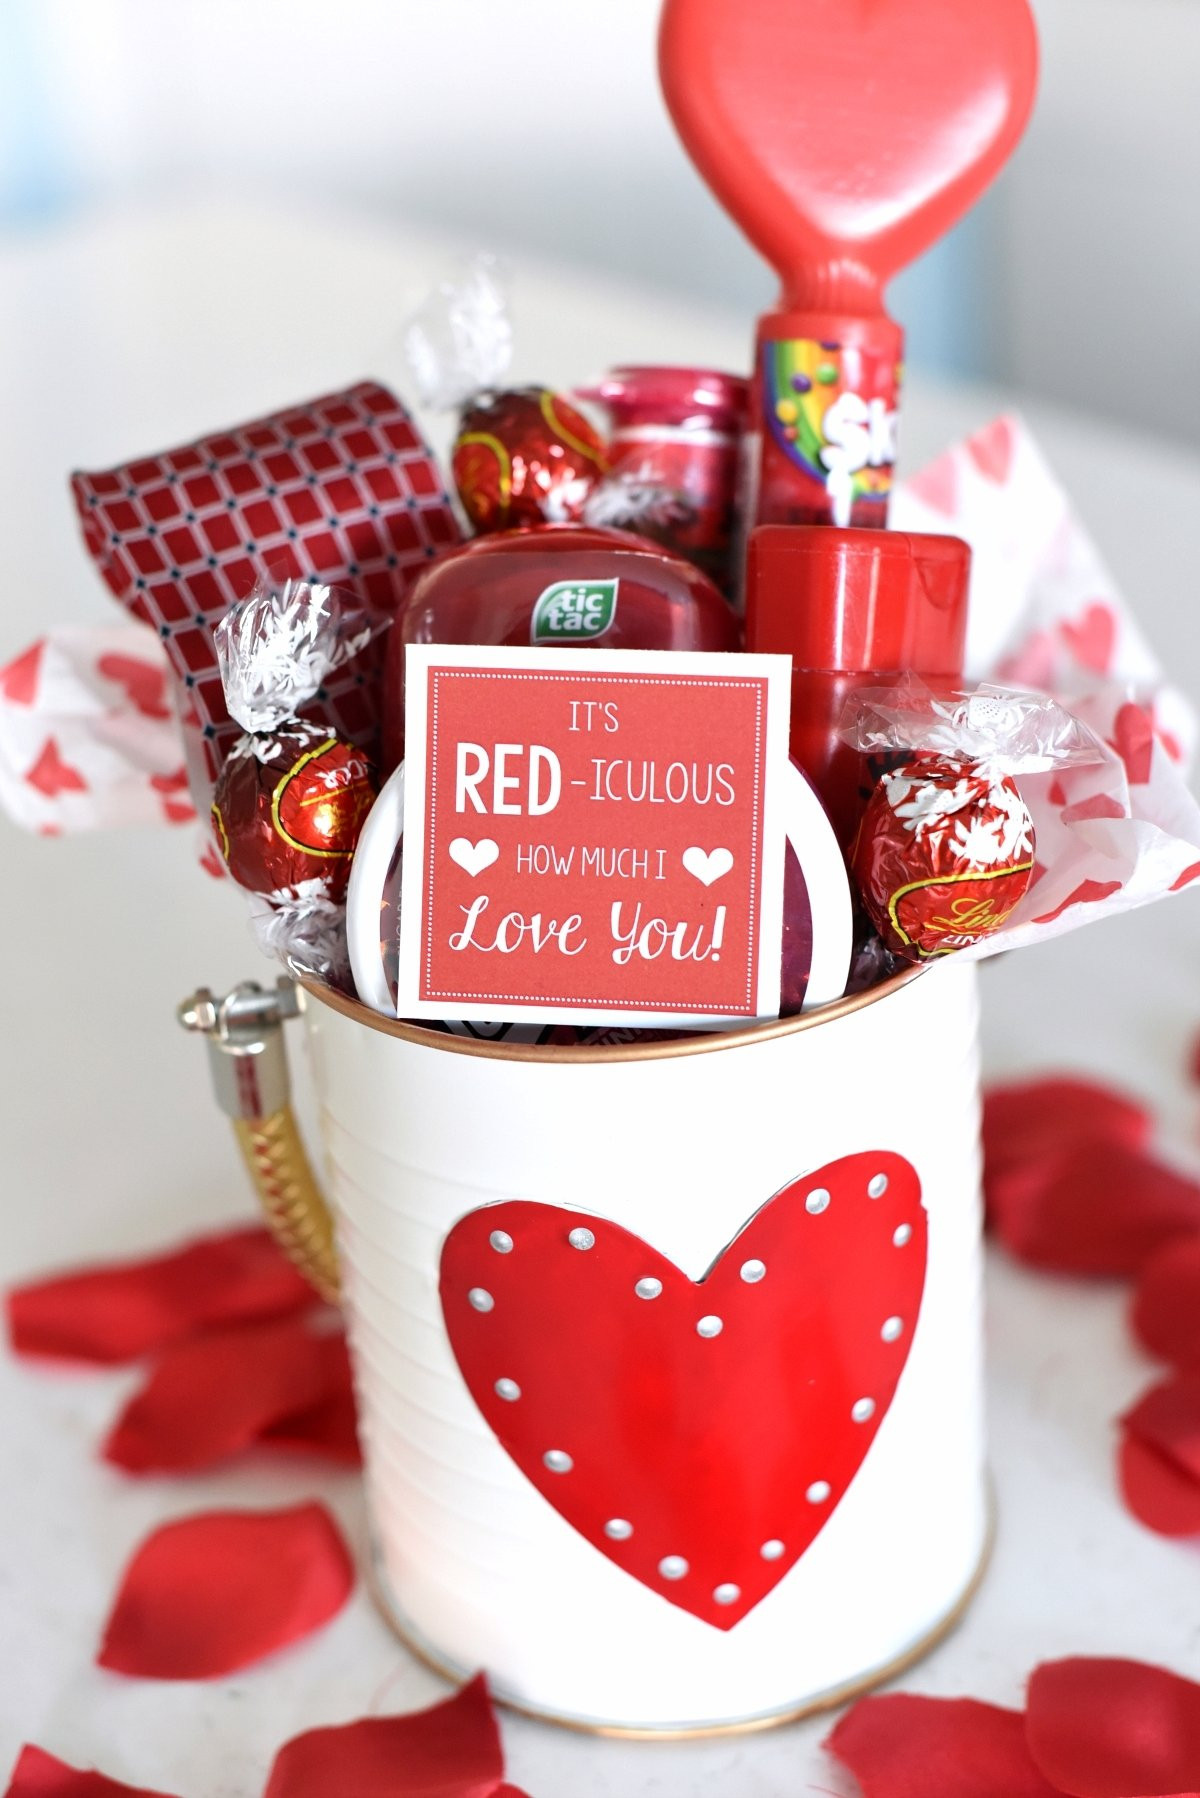 Cool Valentine Gift Ideas
 10 Elegant Valentines Day Gift Ideas For Wife 2020